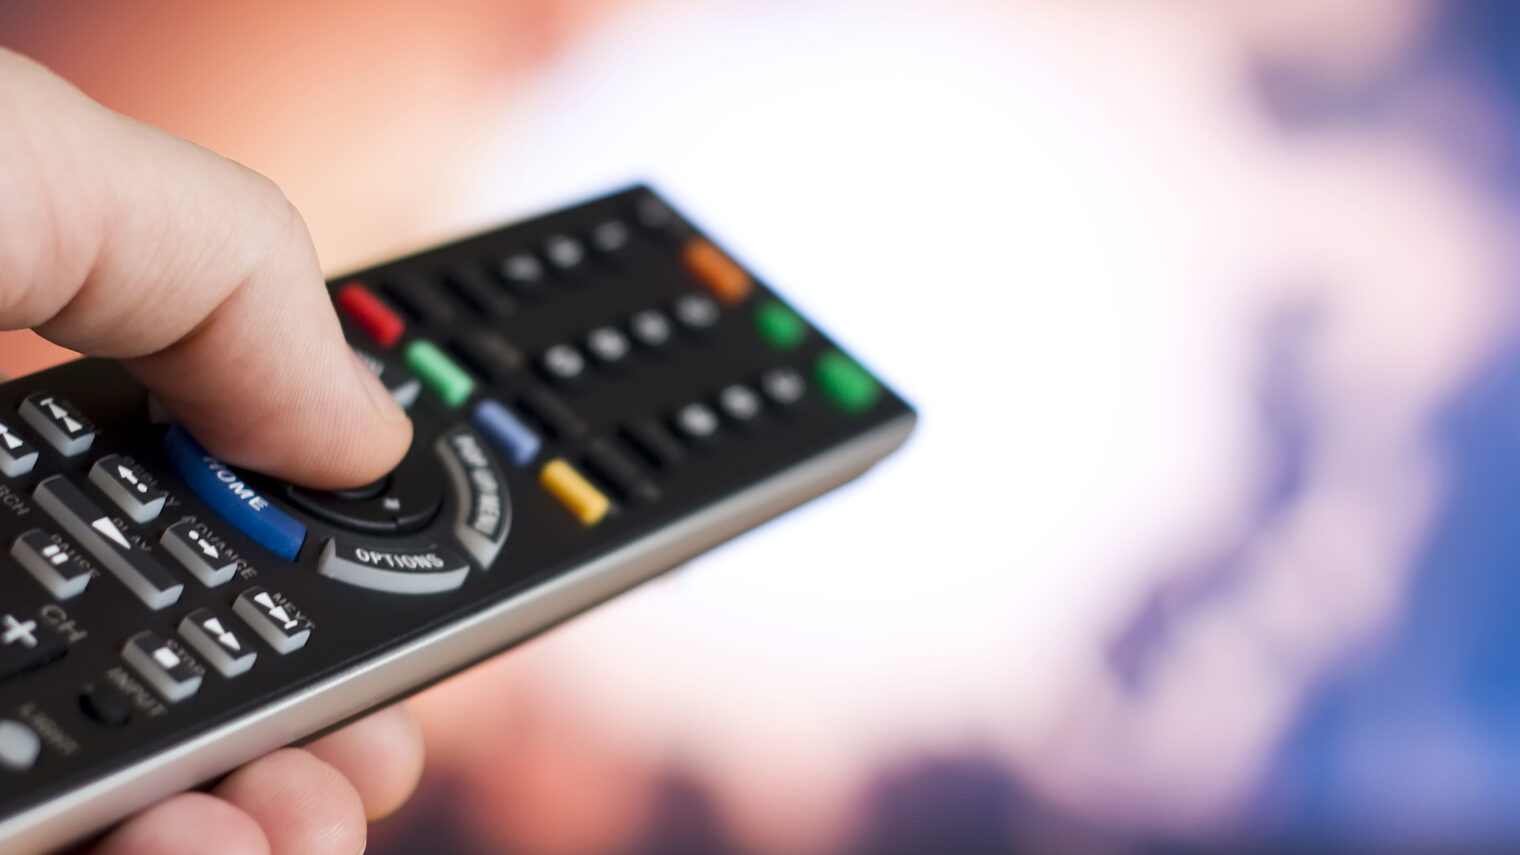 remote, remote control, channel, channel surfing, hand, tv, television, media, movies, movie, film, entertainment, fingers, holding, changing channel, watching tv, watching television, relaxation, buttons, selective focus, copy space